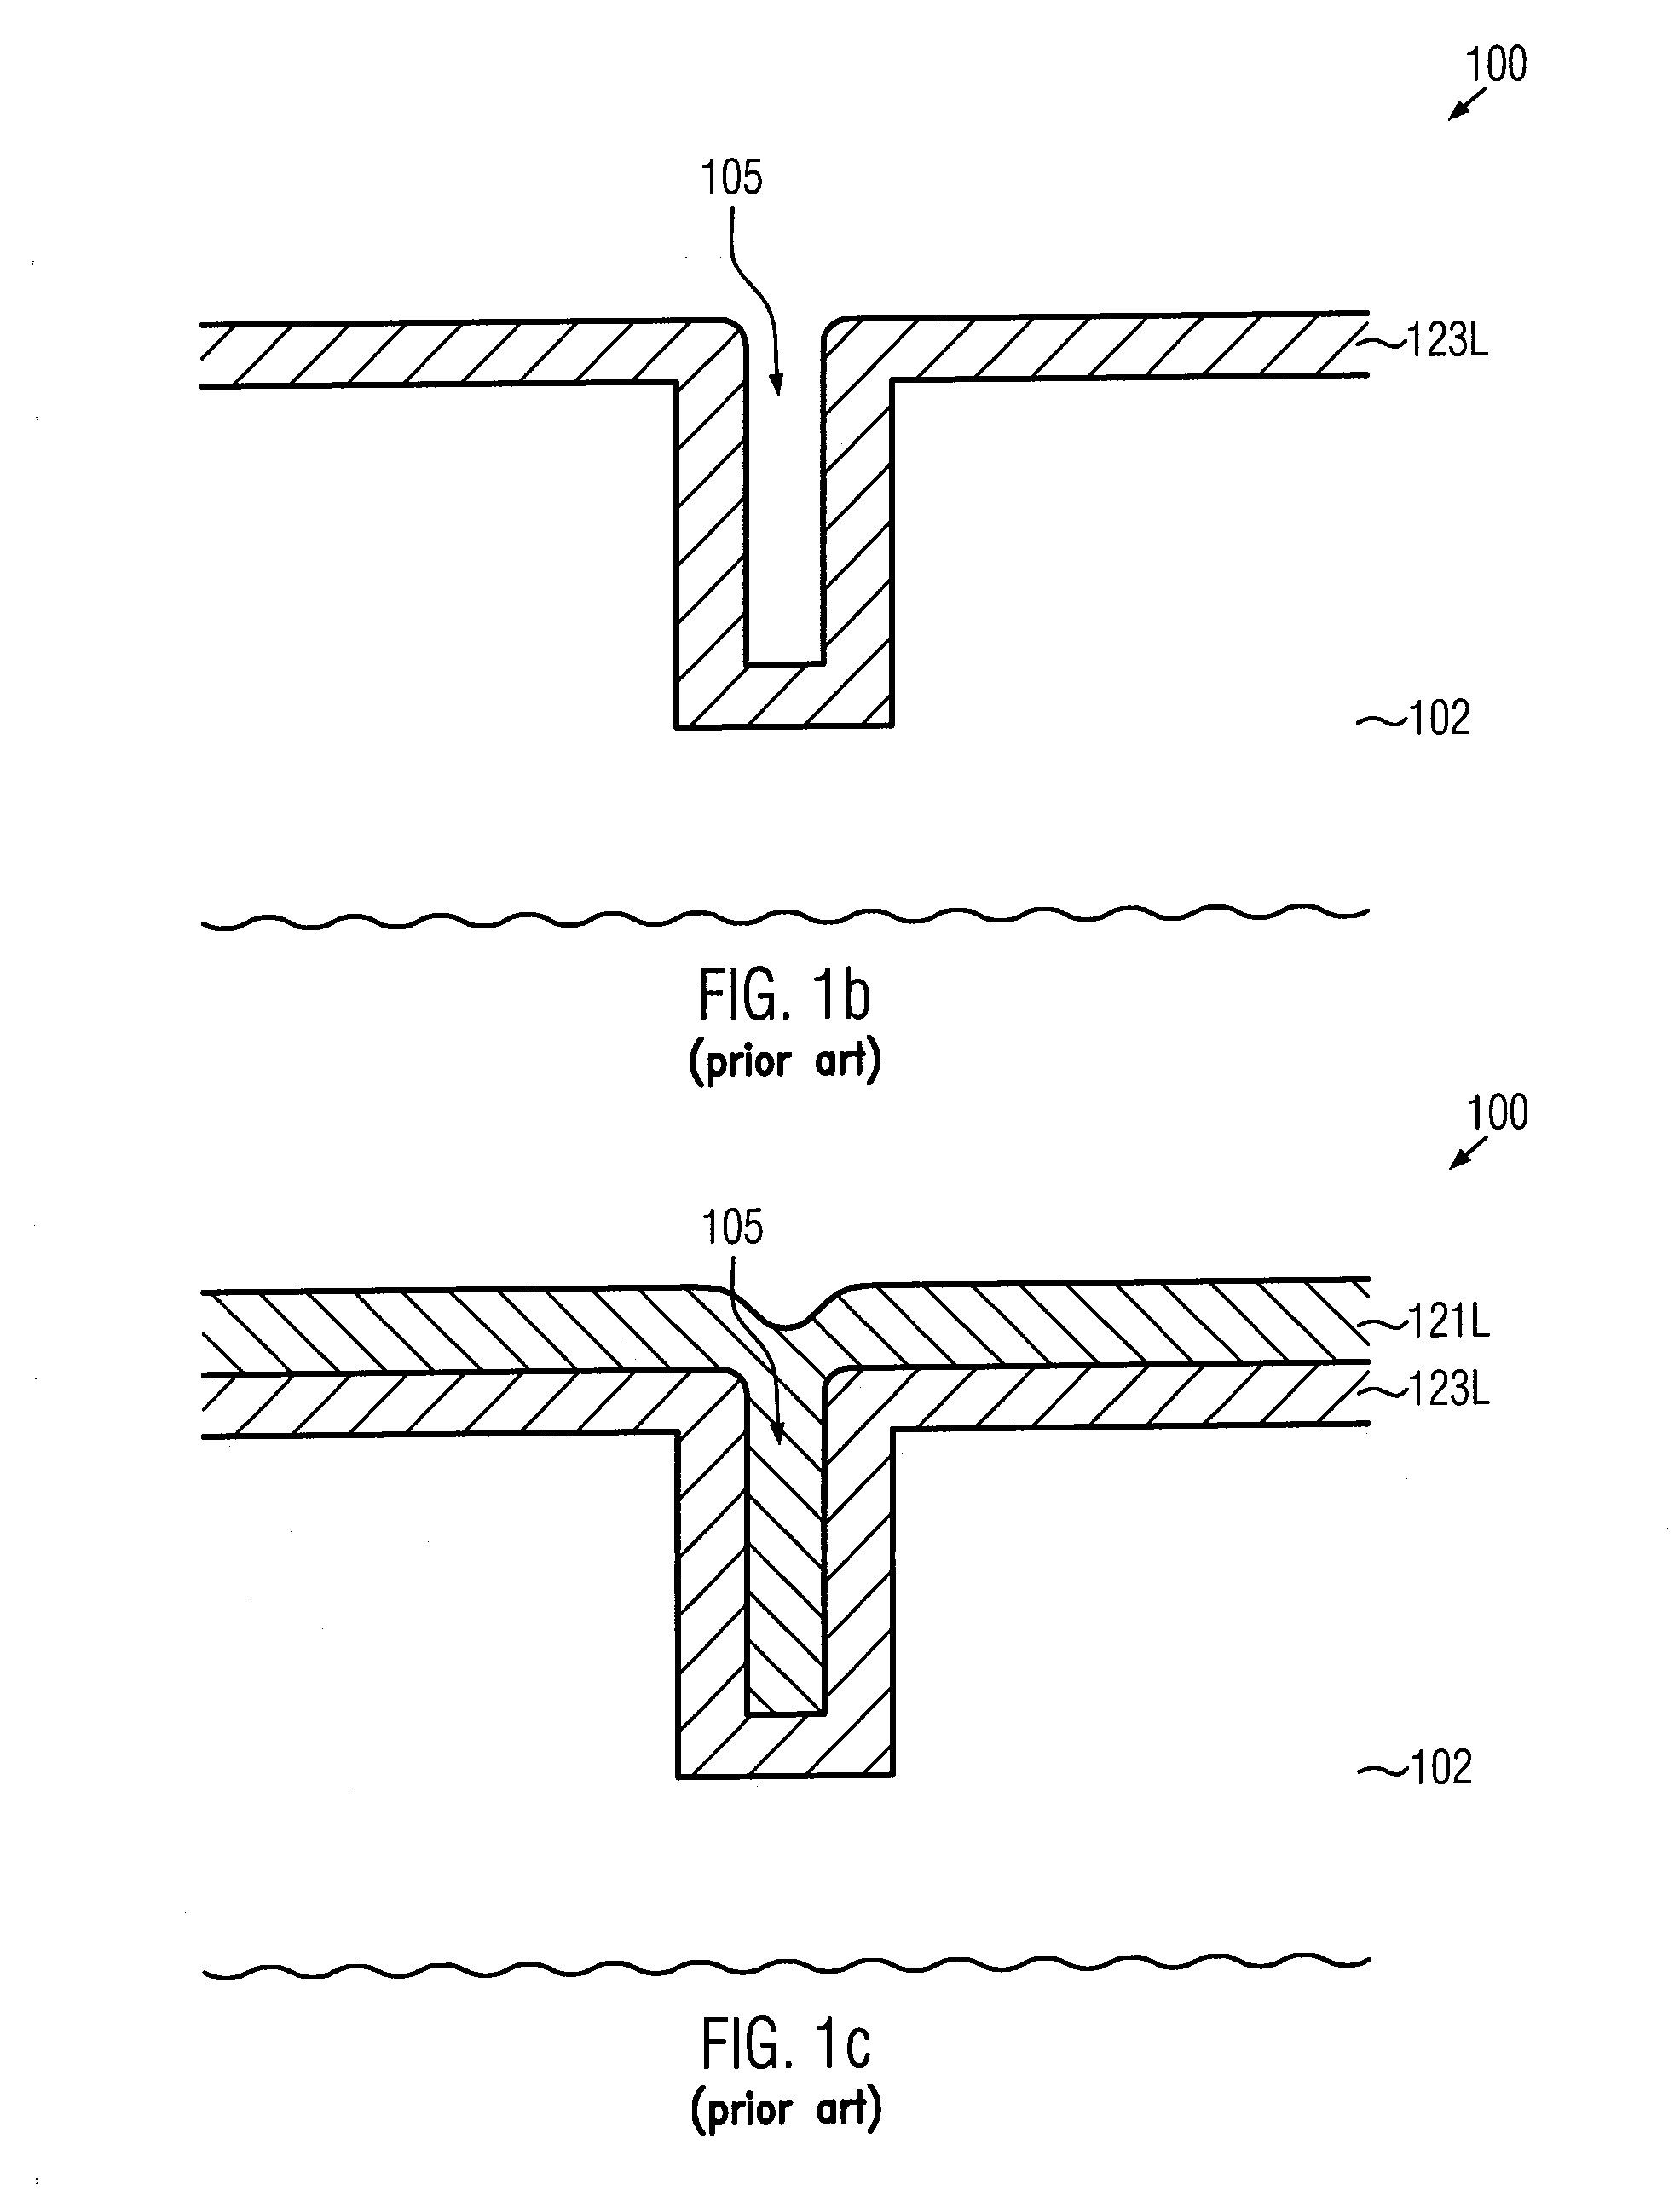 Method and a structure for enhancing electrical insulation and dynamic performance of mis structures comprising vertical field plates